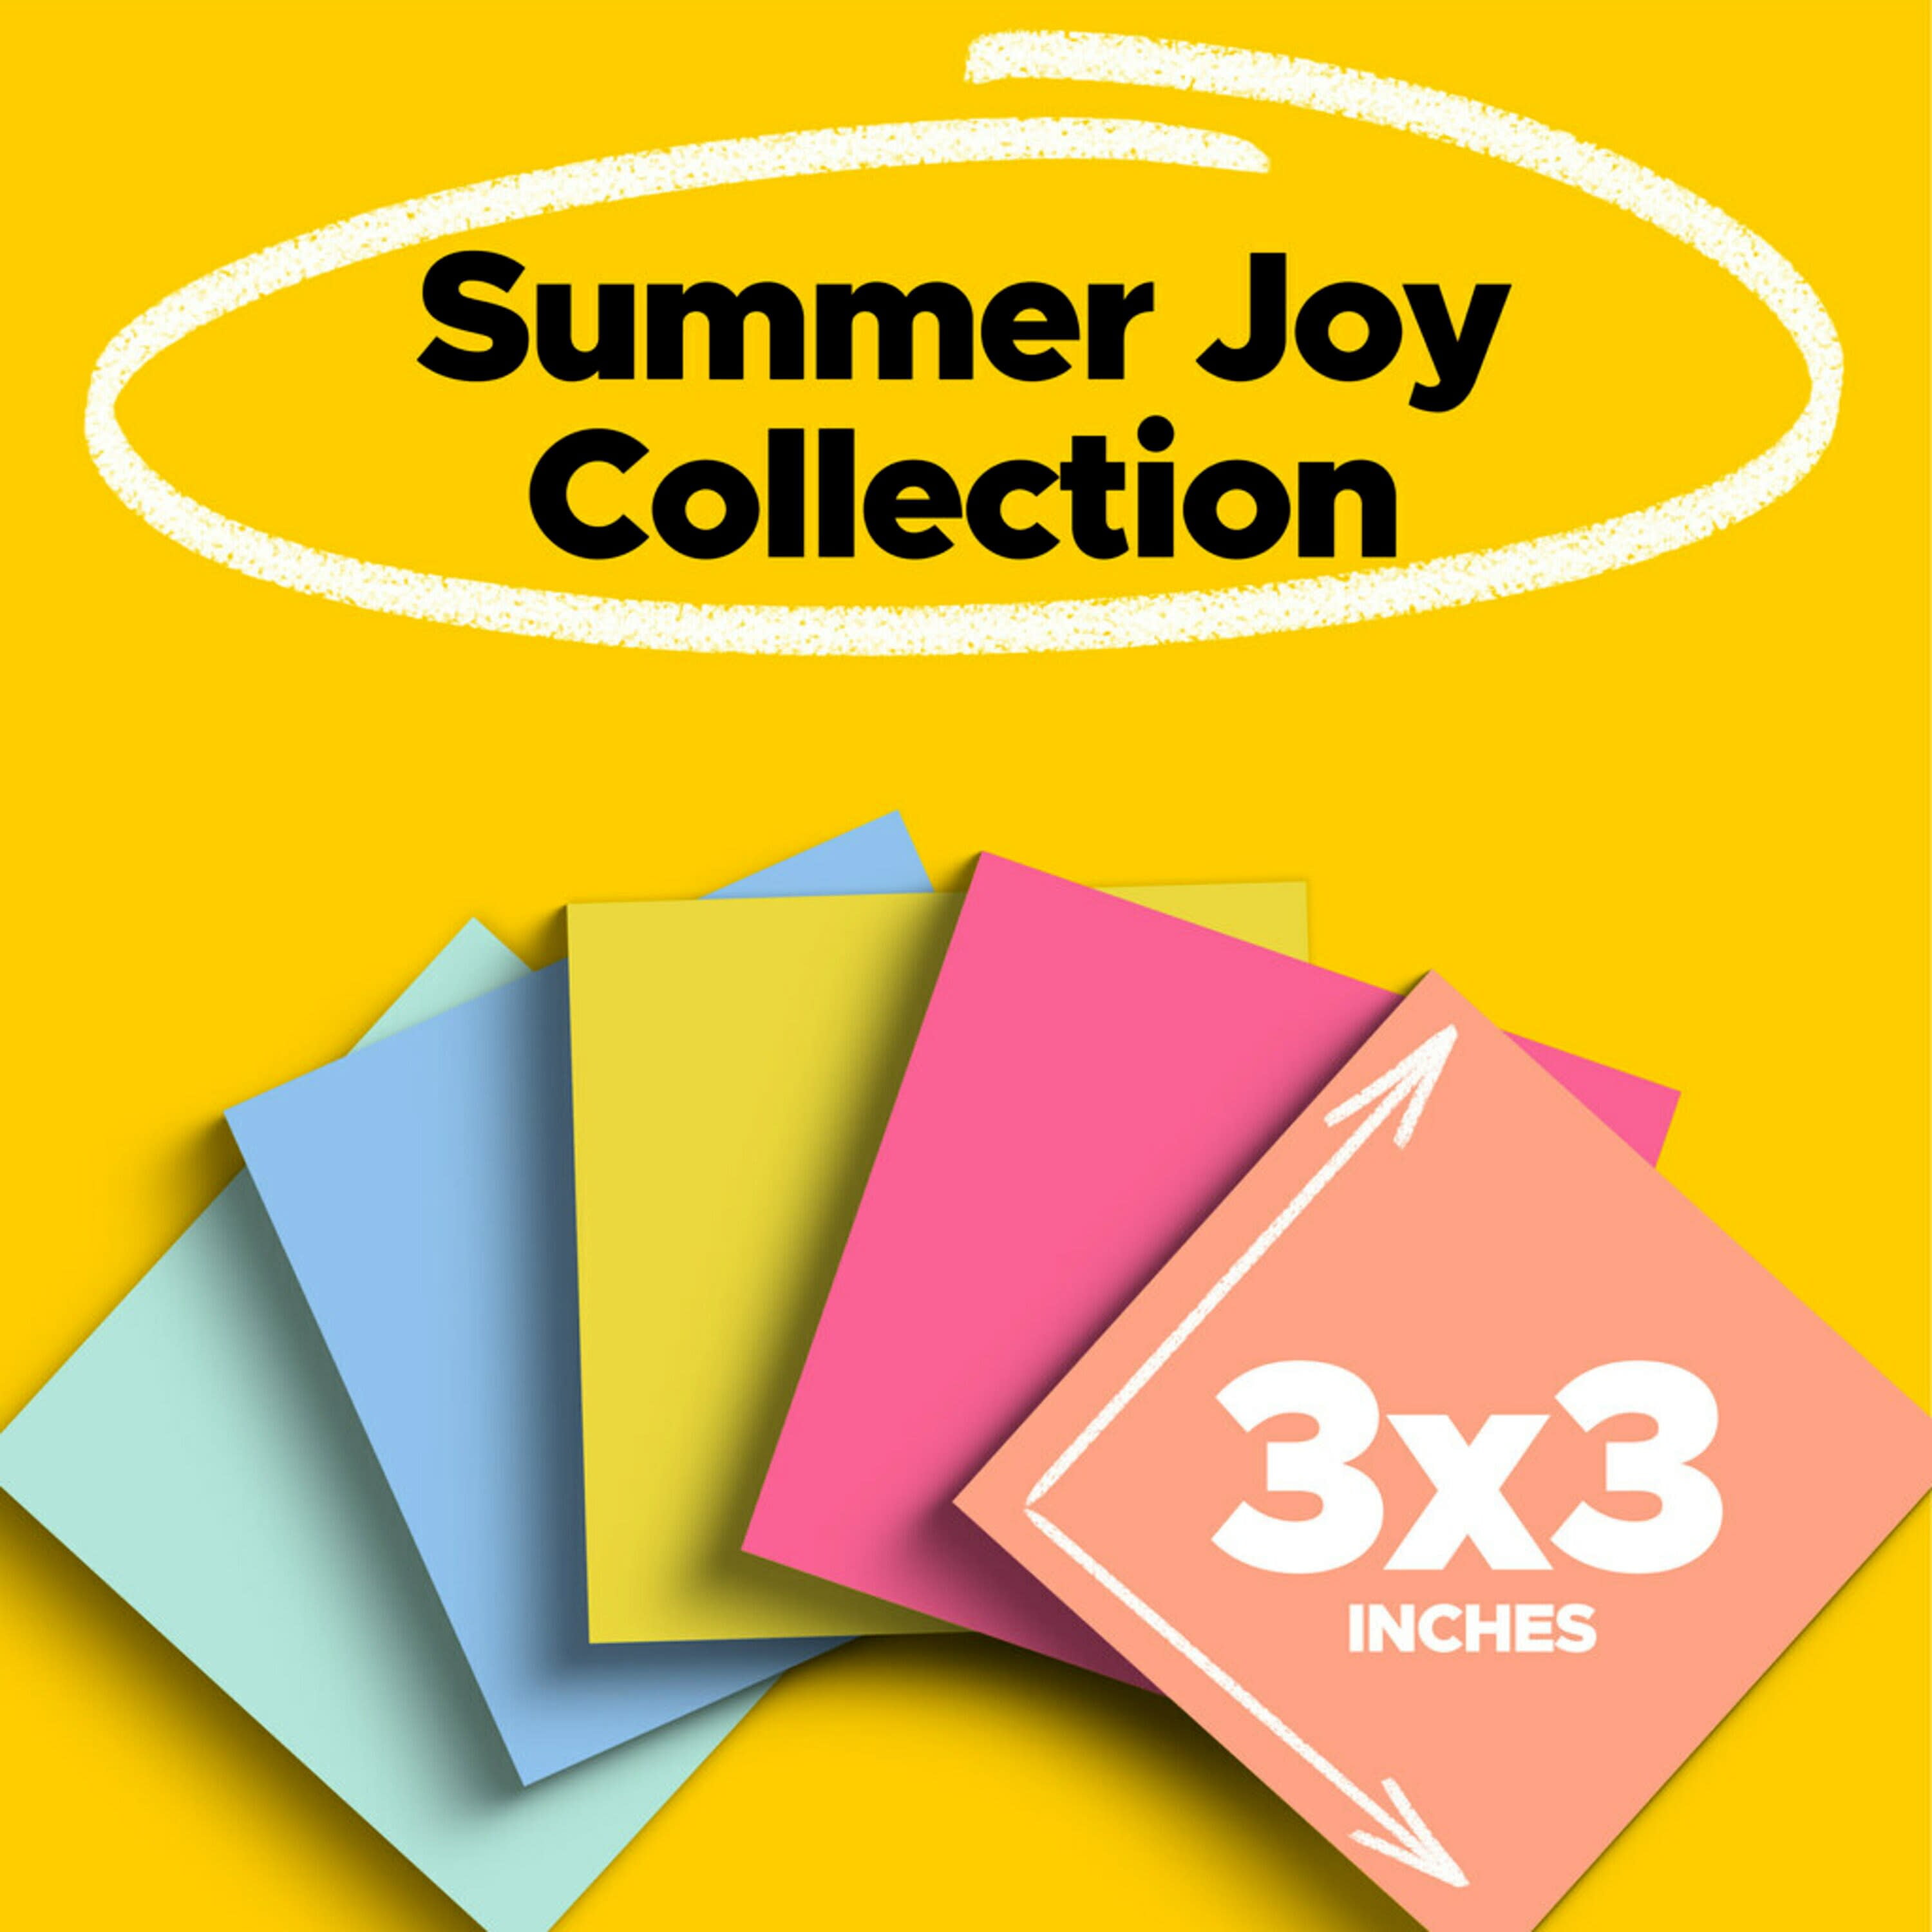 Post-it Notes Super Sticky Pads in Summer Joy Collection Colors 1.88x1.88 90 Sheets/Pad 8 Pads/Pack MPN#7100299576